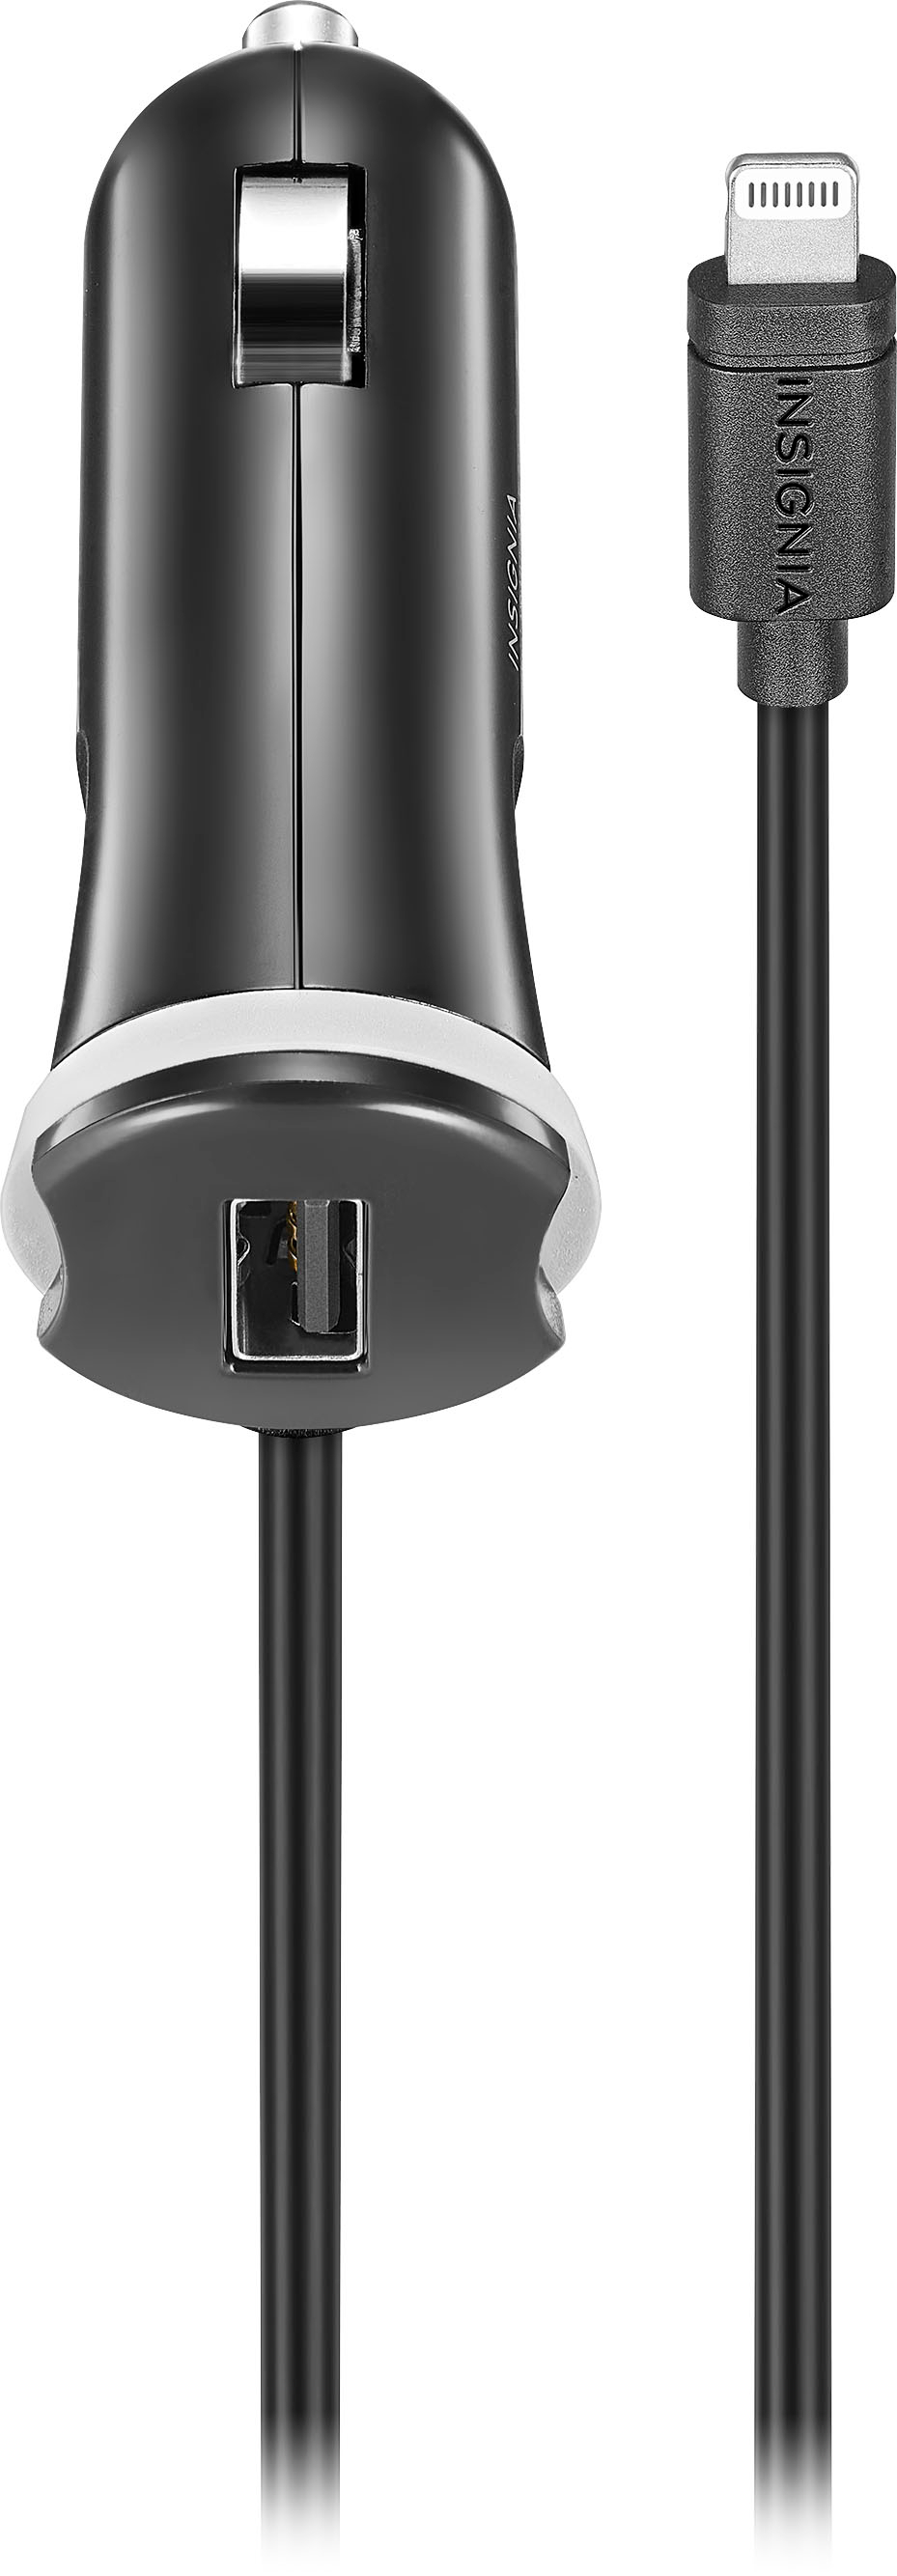 insignia car charger - Best Buy